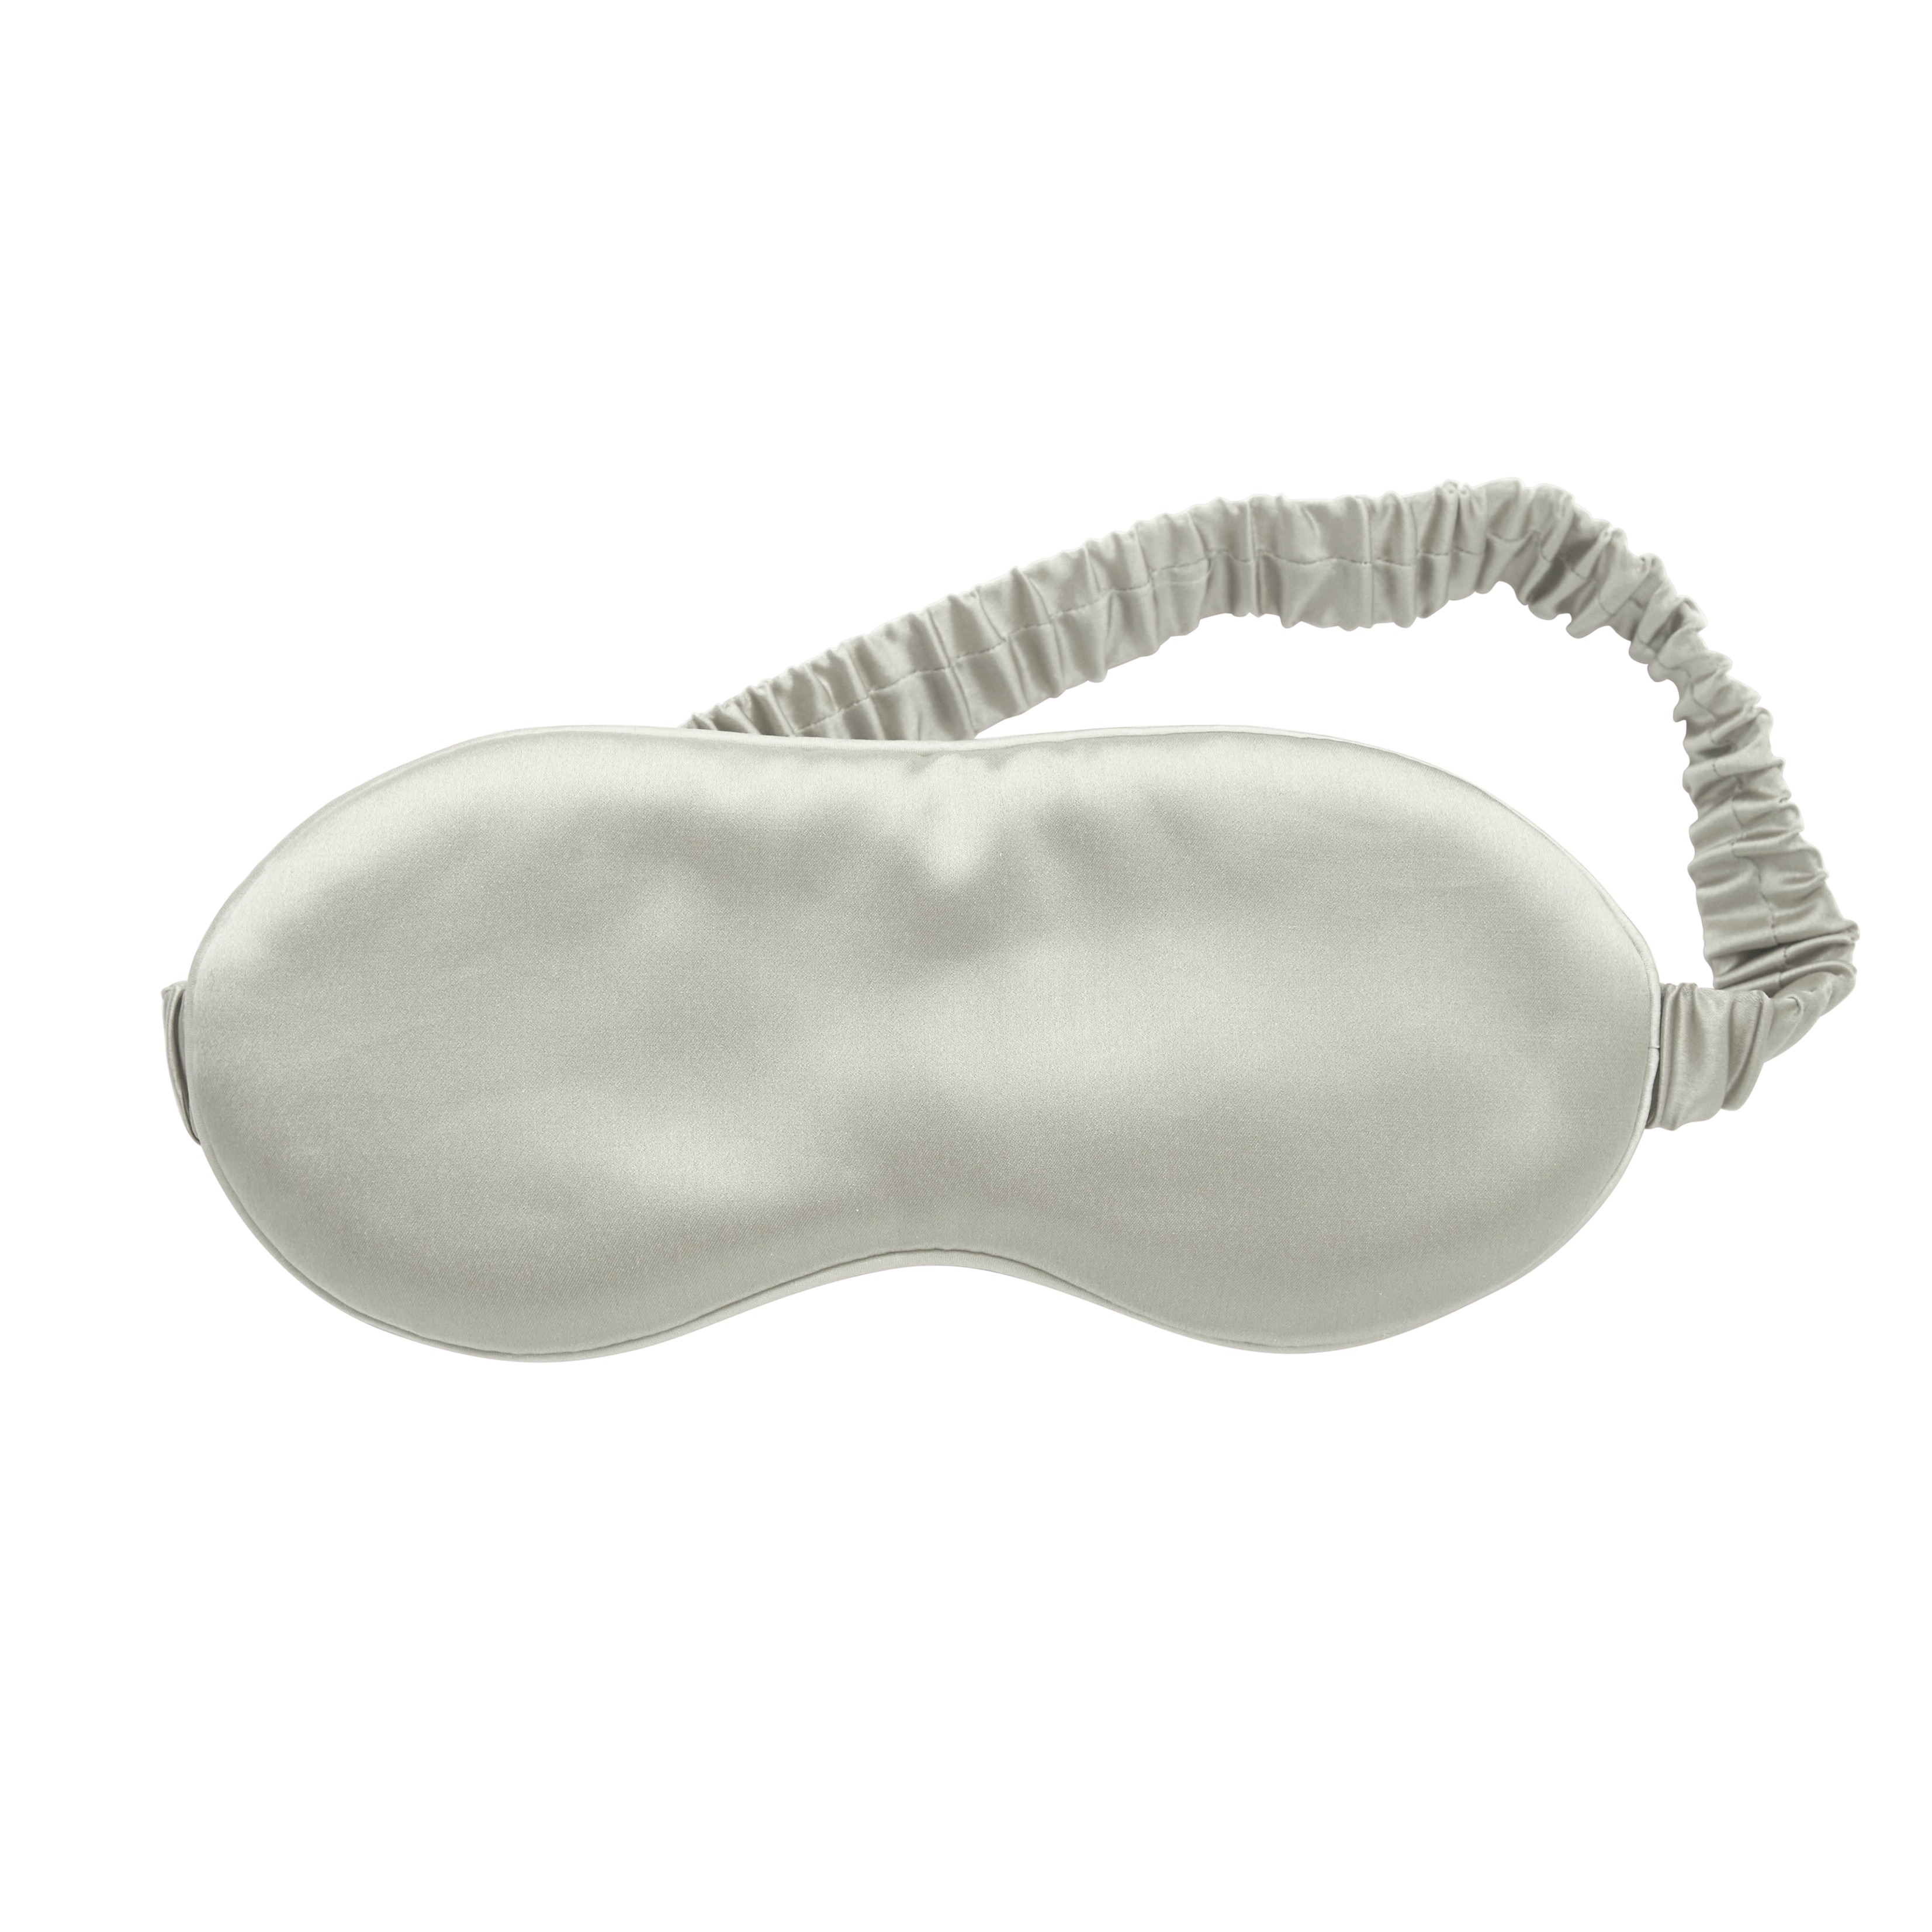 LENOITES Mulberry Sleep Mask & Pouch Grey 1 st